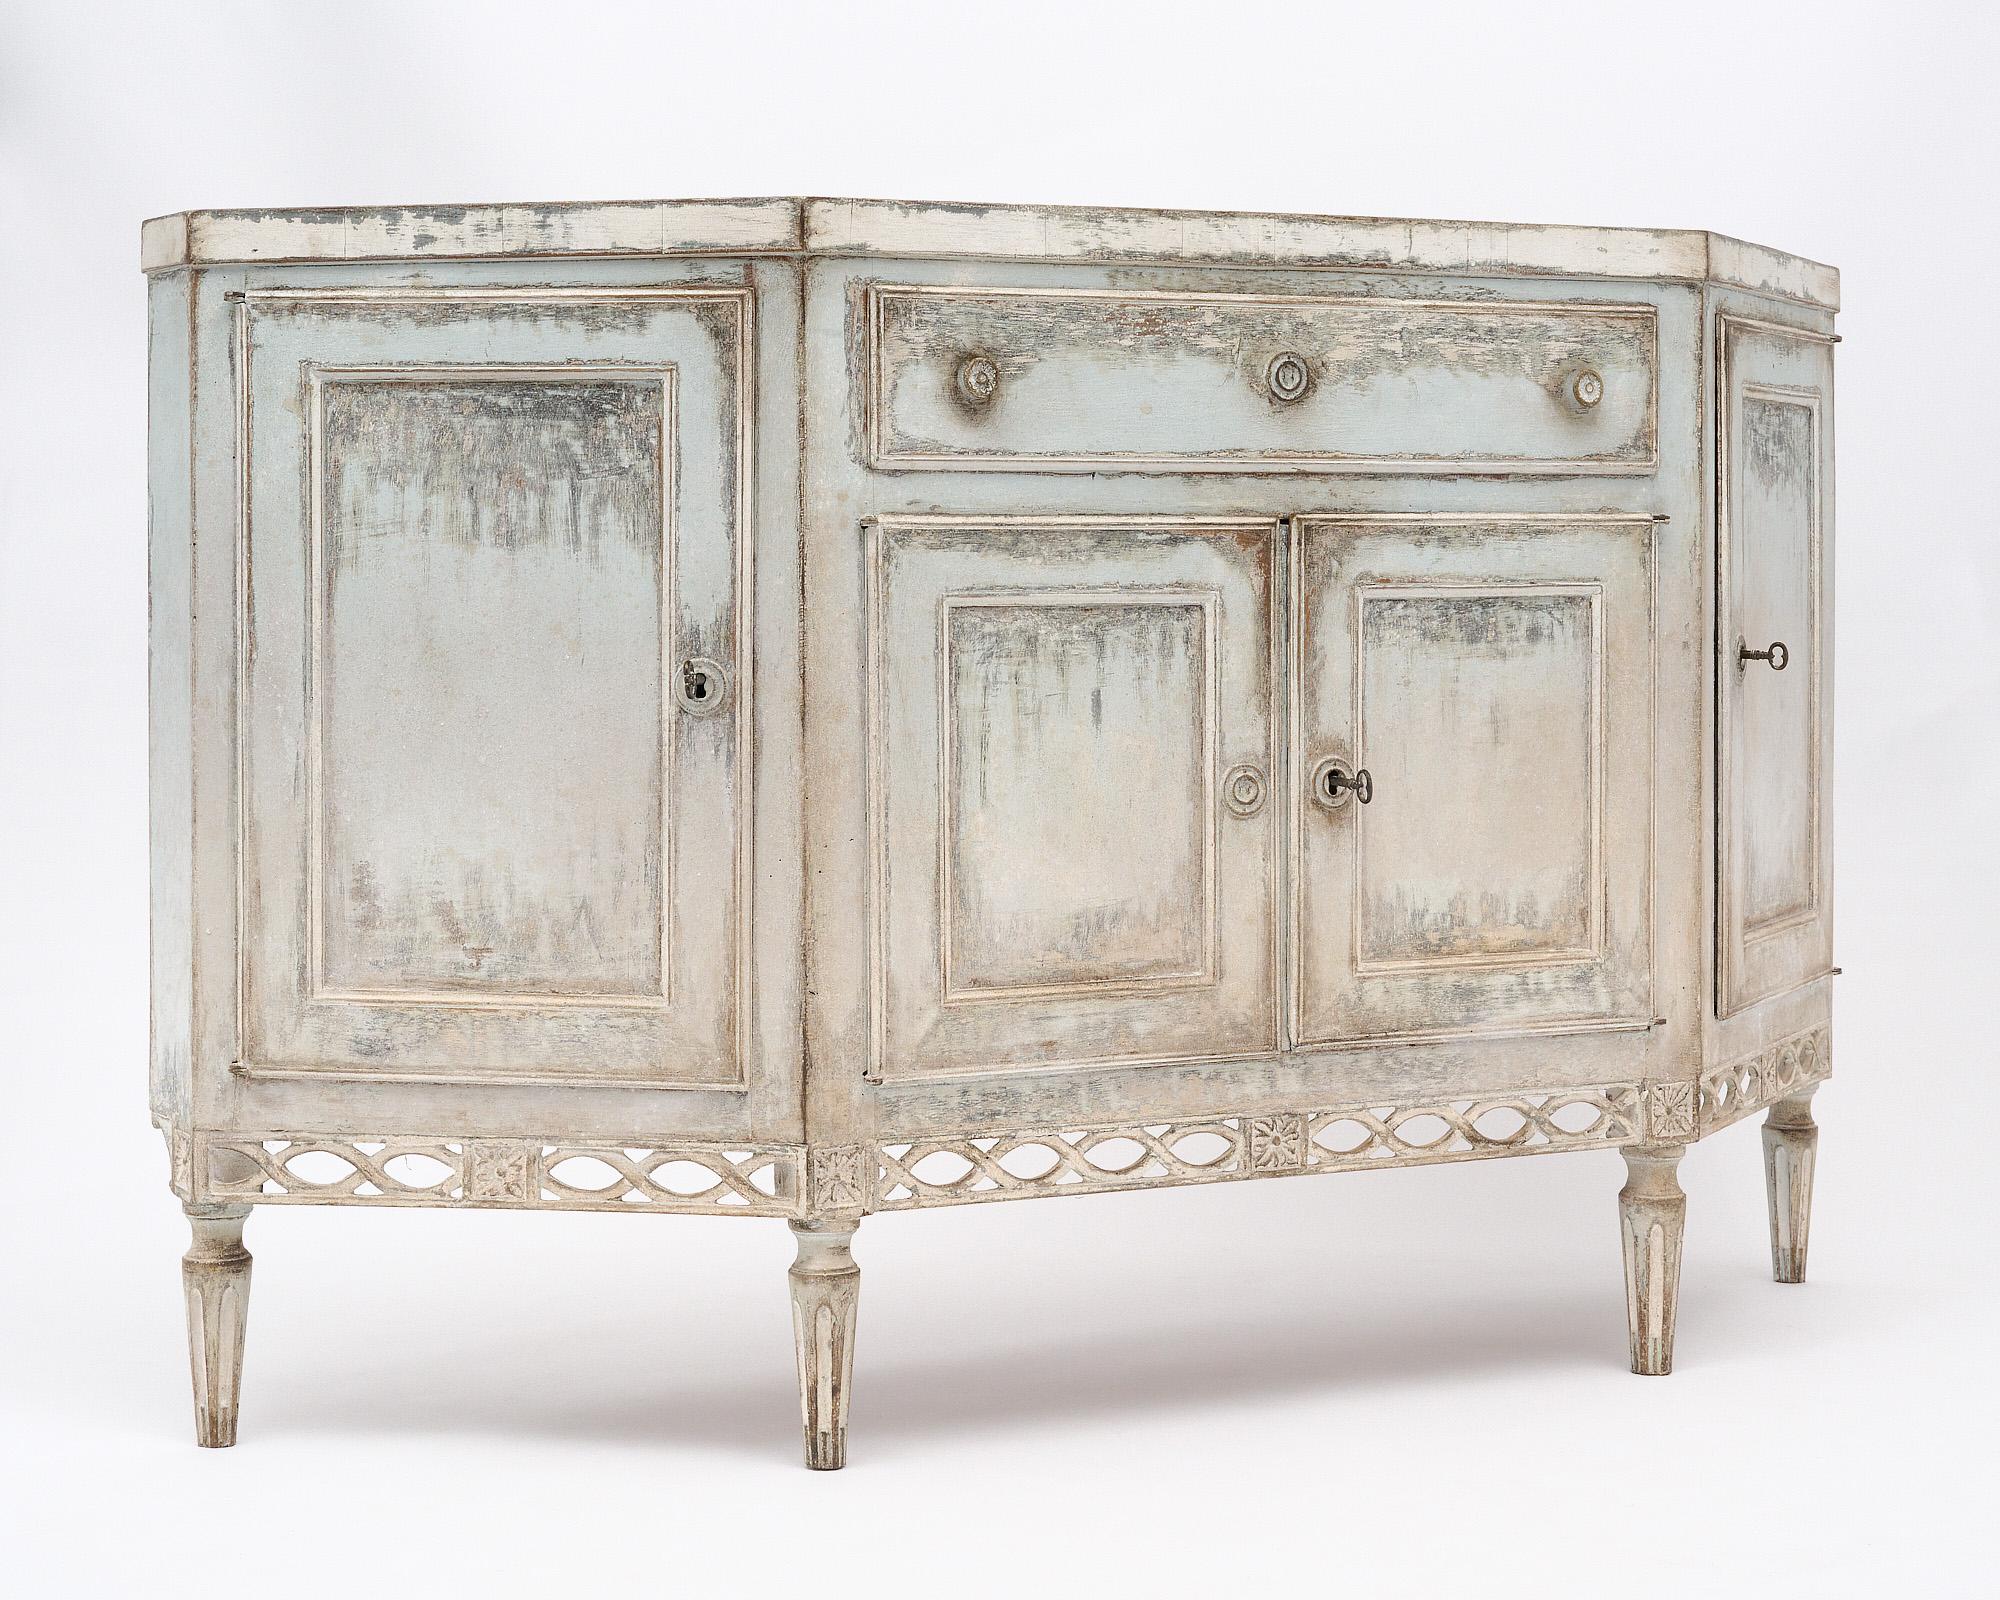 Buffet from Italy with original painted finish. This case piece has four doors that open to interior shelving and one dovetailed drawer. The locks are in working order with original keys. The case piece has a light blue finish while the top is